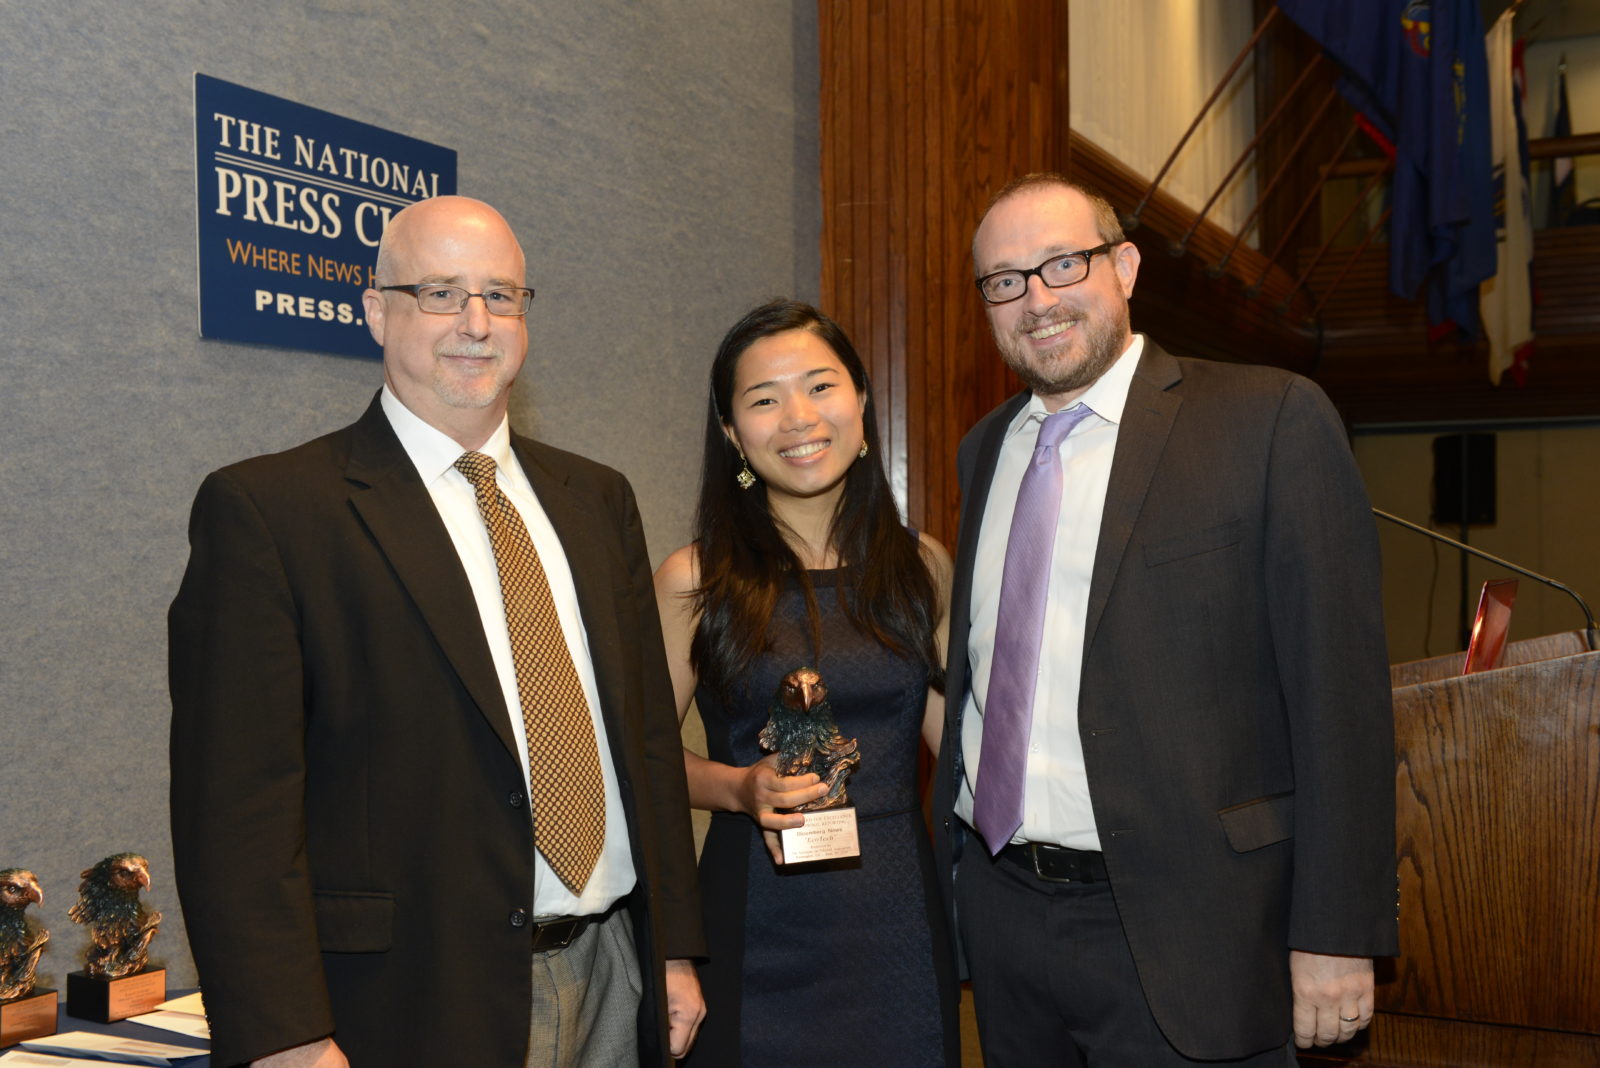 John Merline (right) of the IPJ Board of Visitors presents the 2014 Excellence in Economic Reporting Award to Aki Ito (center) of Bloomberg News at the annual Journalism Awards Ceremony at the National Press Club.      